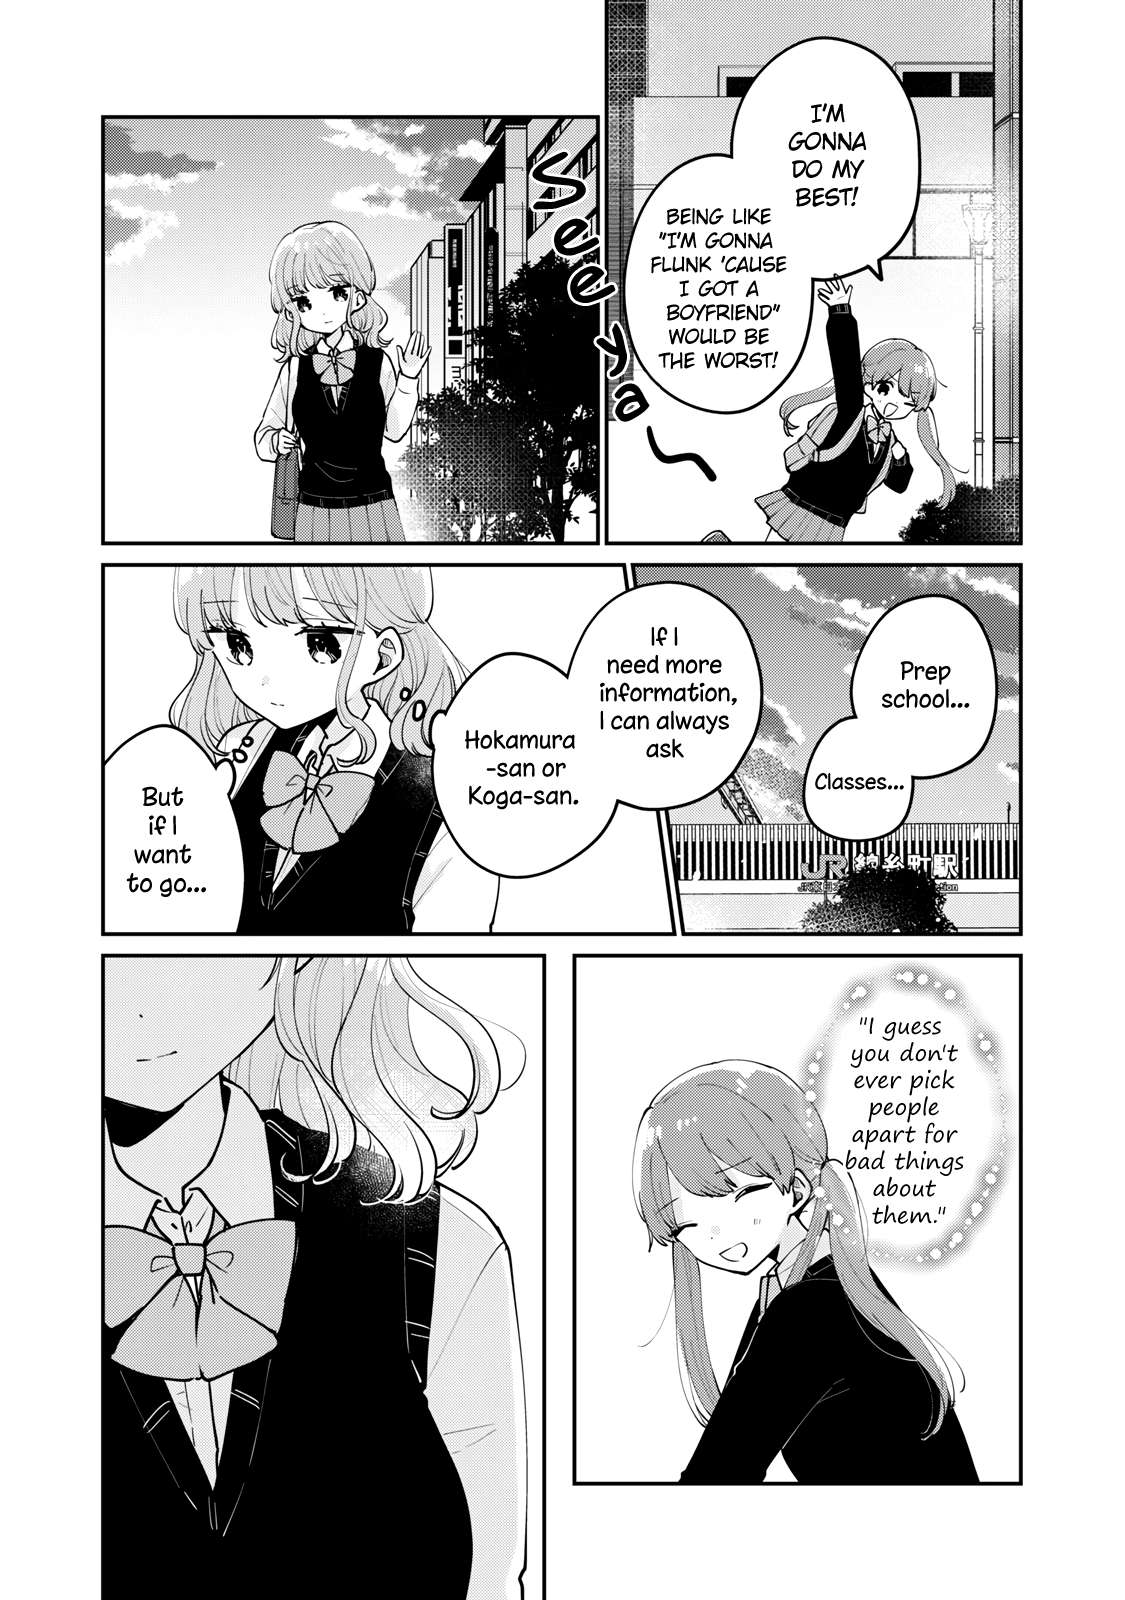 It's Not Meguro-san's First Time chapter 67 page 15